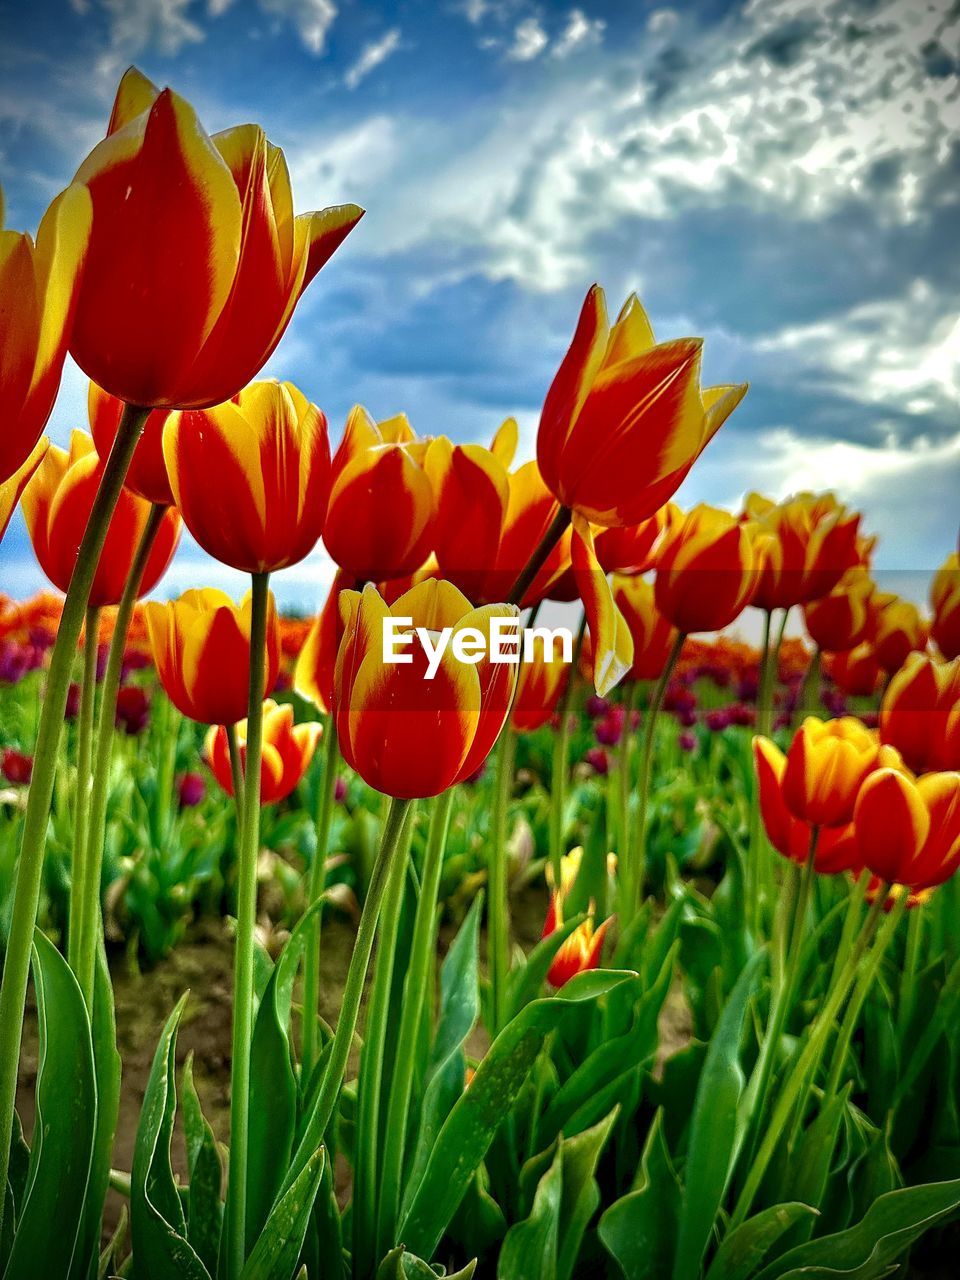 plant, flower, flowering plant, beauty in nature, freshness, nature, sky, cloud, growth, petal, flower head, red, field, inflorescence, tulip, fragility, close-up, land, landscape, leaf, plant part, springtime, no people, environment, green, vibrant color, flowerbed, multi colored, outdoors, sunlight, yellow, grass, rural scene, botany, summer, blossom, orange color, day, blue, ornamental garden, agriculture, meadow, plant stem